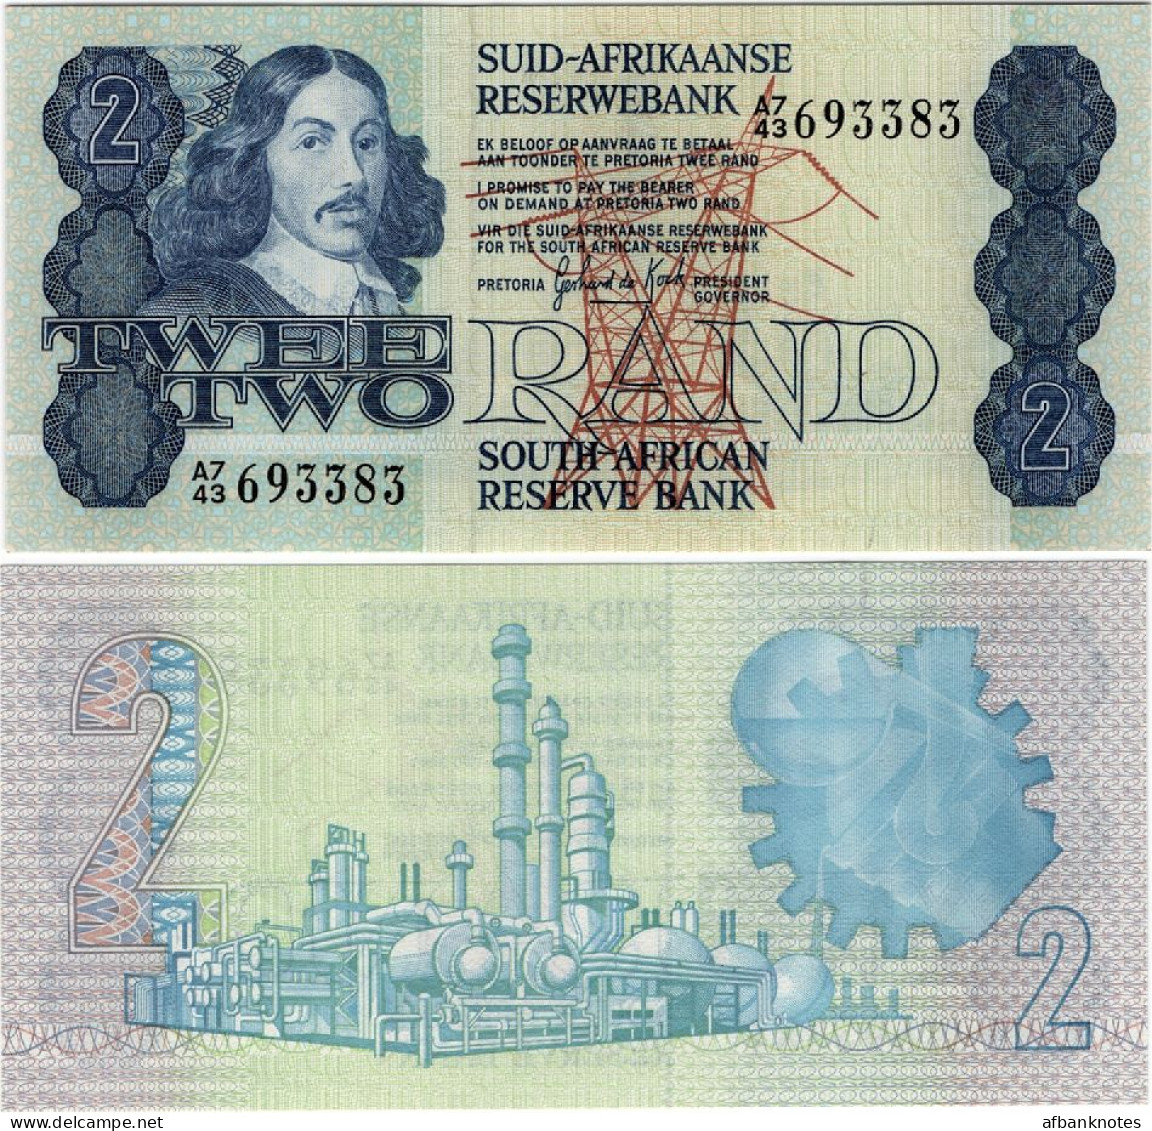 SOUTH AFRICA       2 Rand       P-118c       ND (ca. 1981)       UNC - South Africa